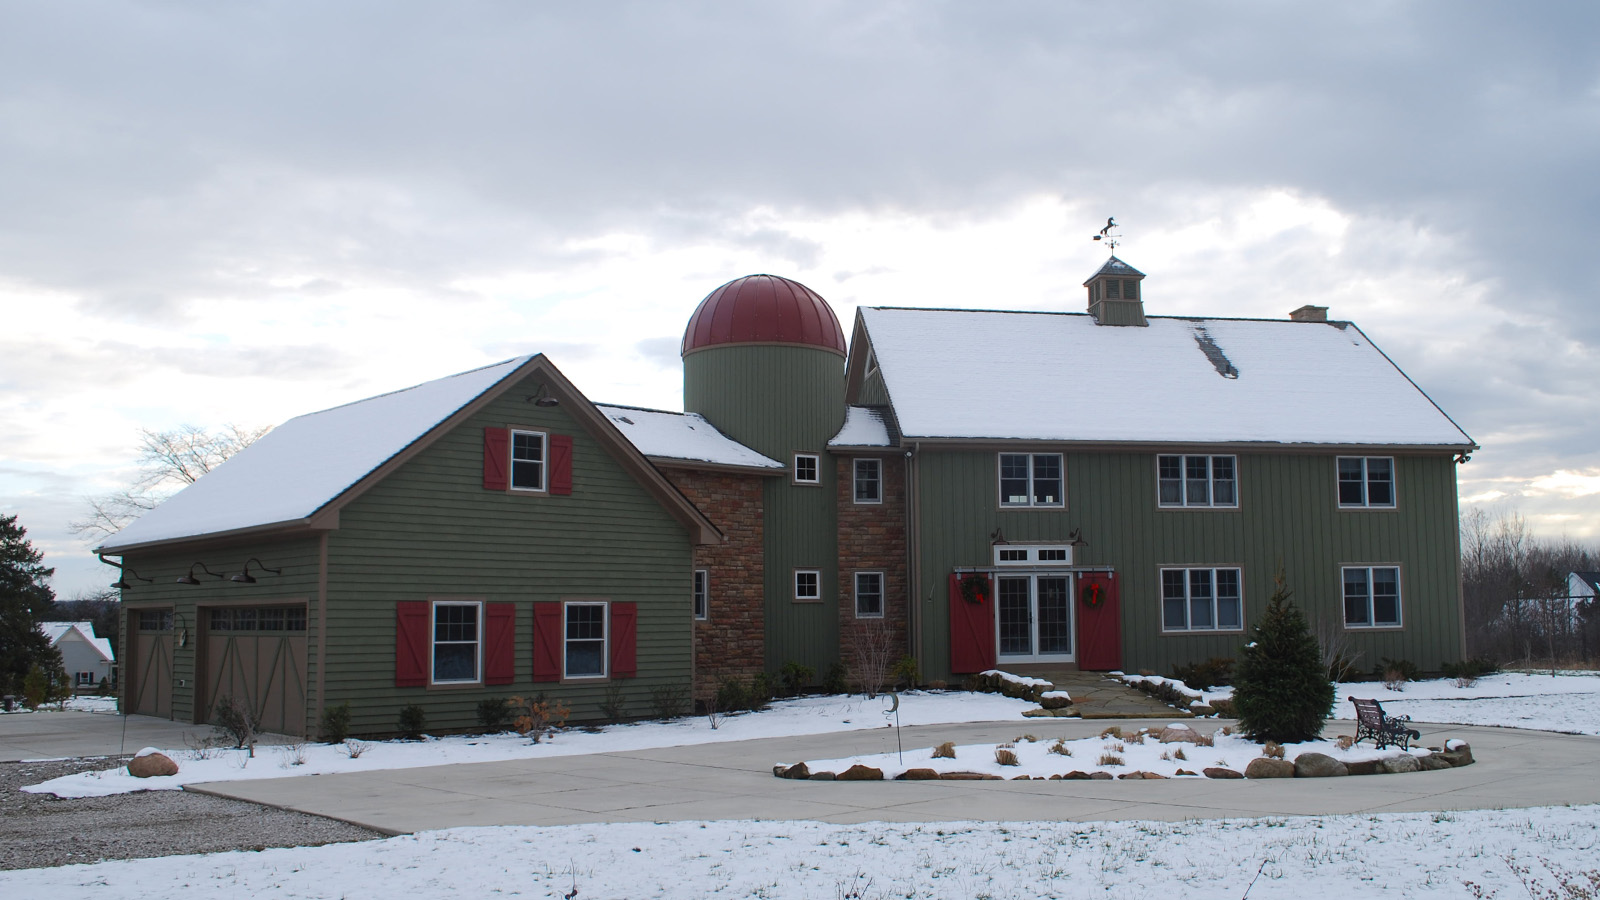 Chagrin Falls, OH Barn Style Home (T00160) exterior view in the snow featuring green home with red trim and shutters